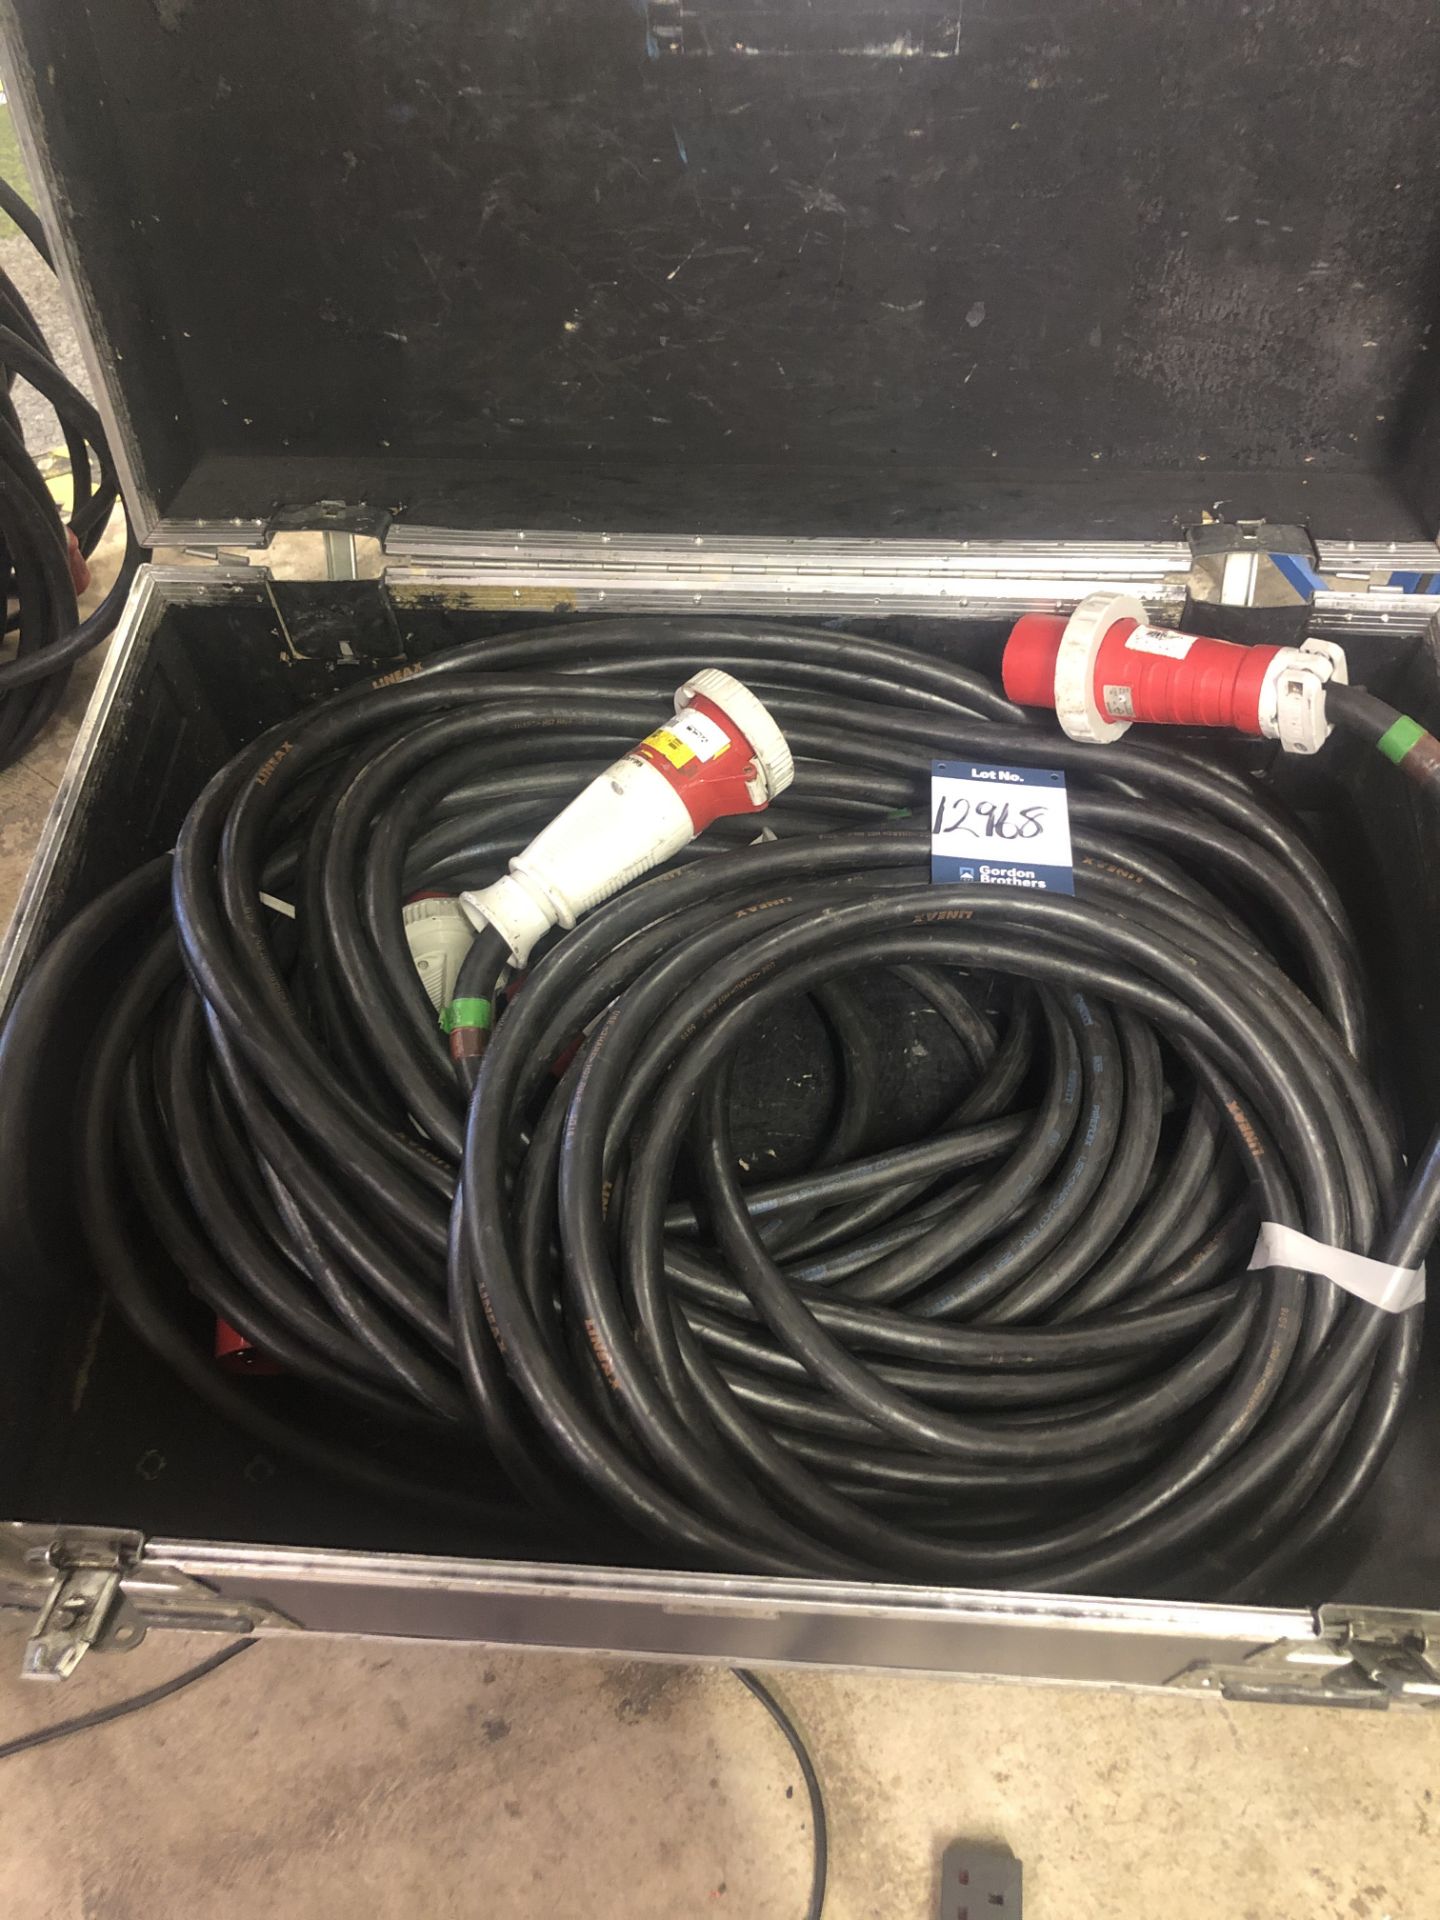 2x No. 15m 63 amp 3 phase cable in transit case